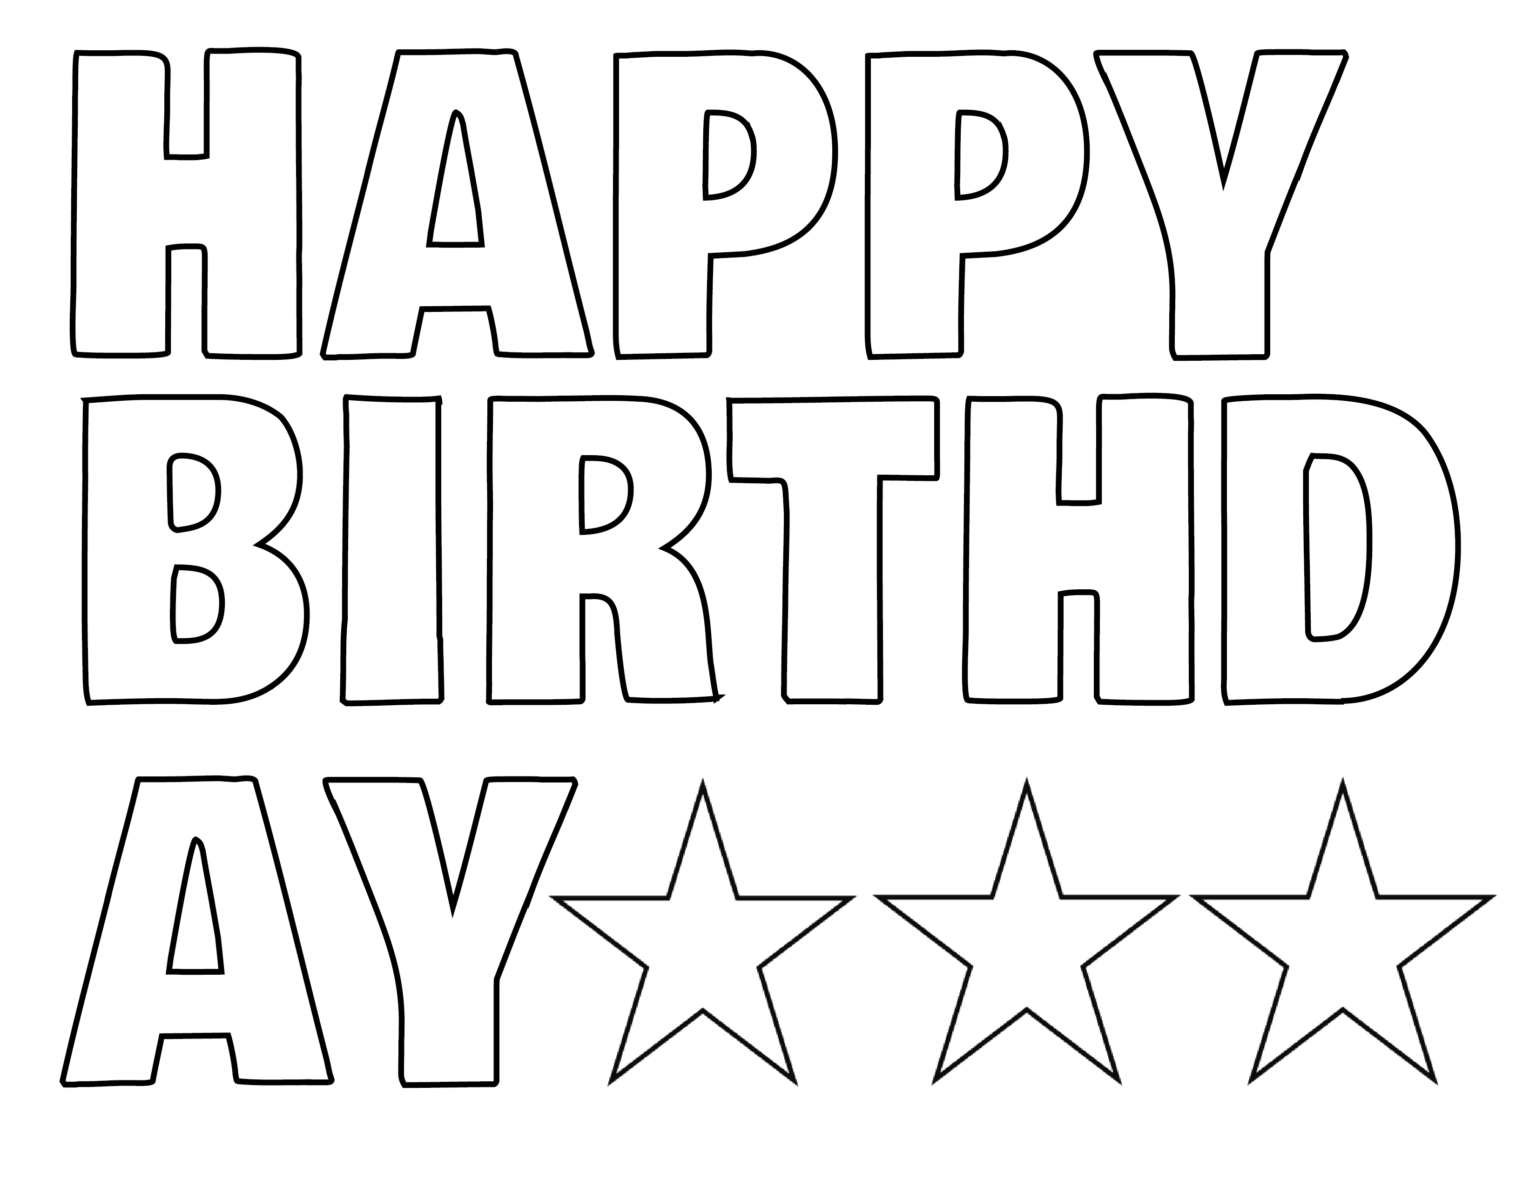 happy-birthday-banner-in-printable-letters-birthday-banner-template-printable-letters-to-cut-out